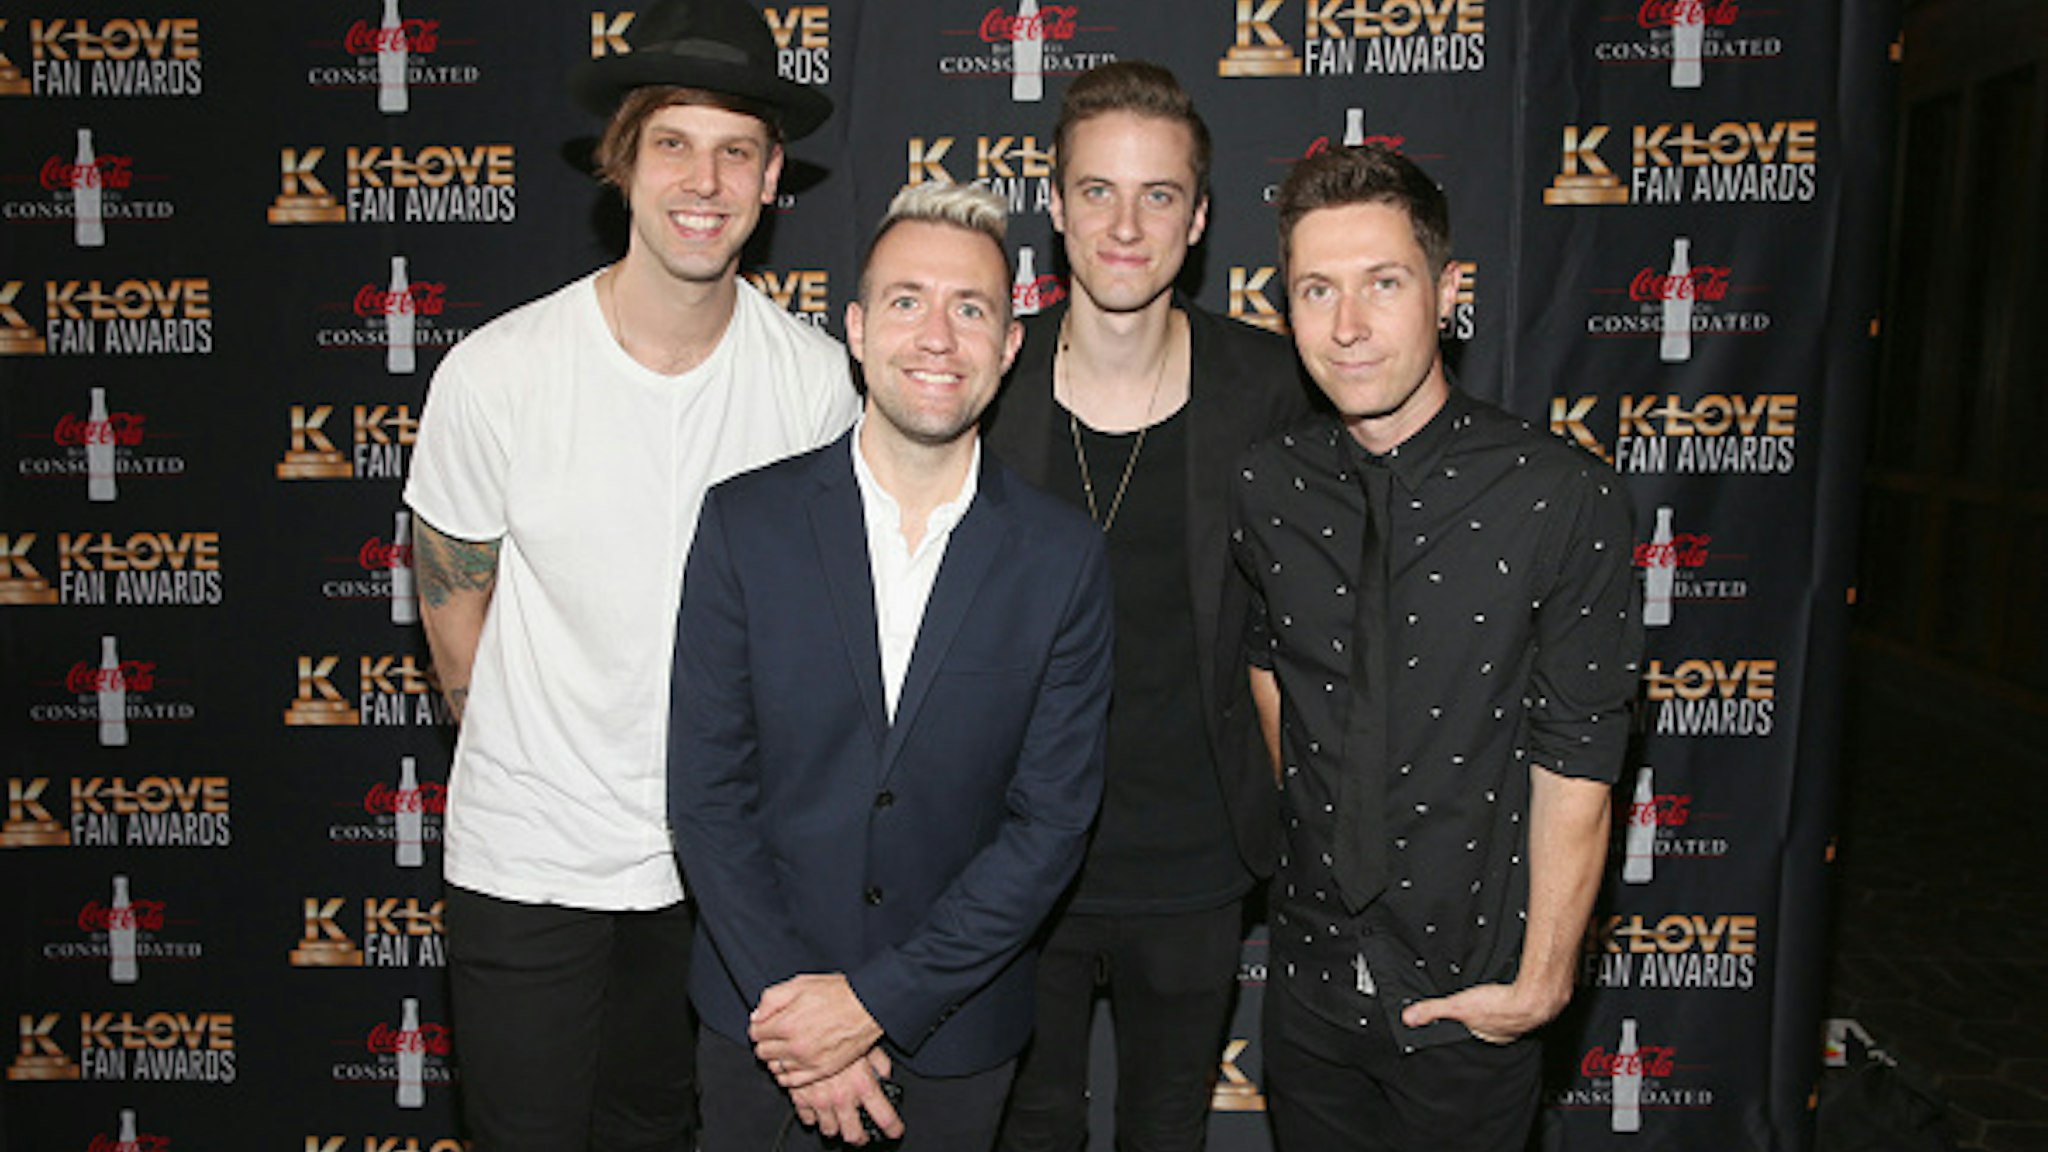 NASHVILLE, TN - MAY 28: David Niacaris, Jon Steingard, Micah Kuiper, and Daniel Biro of Hawk Nelson arrive at the 5th Annual KLOVE Fan Awards at The Grand Ole Opry on May 28, 2017 in Nashville, Tennessee.